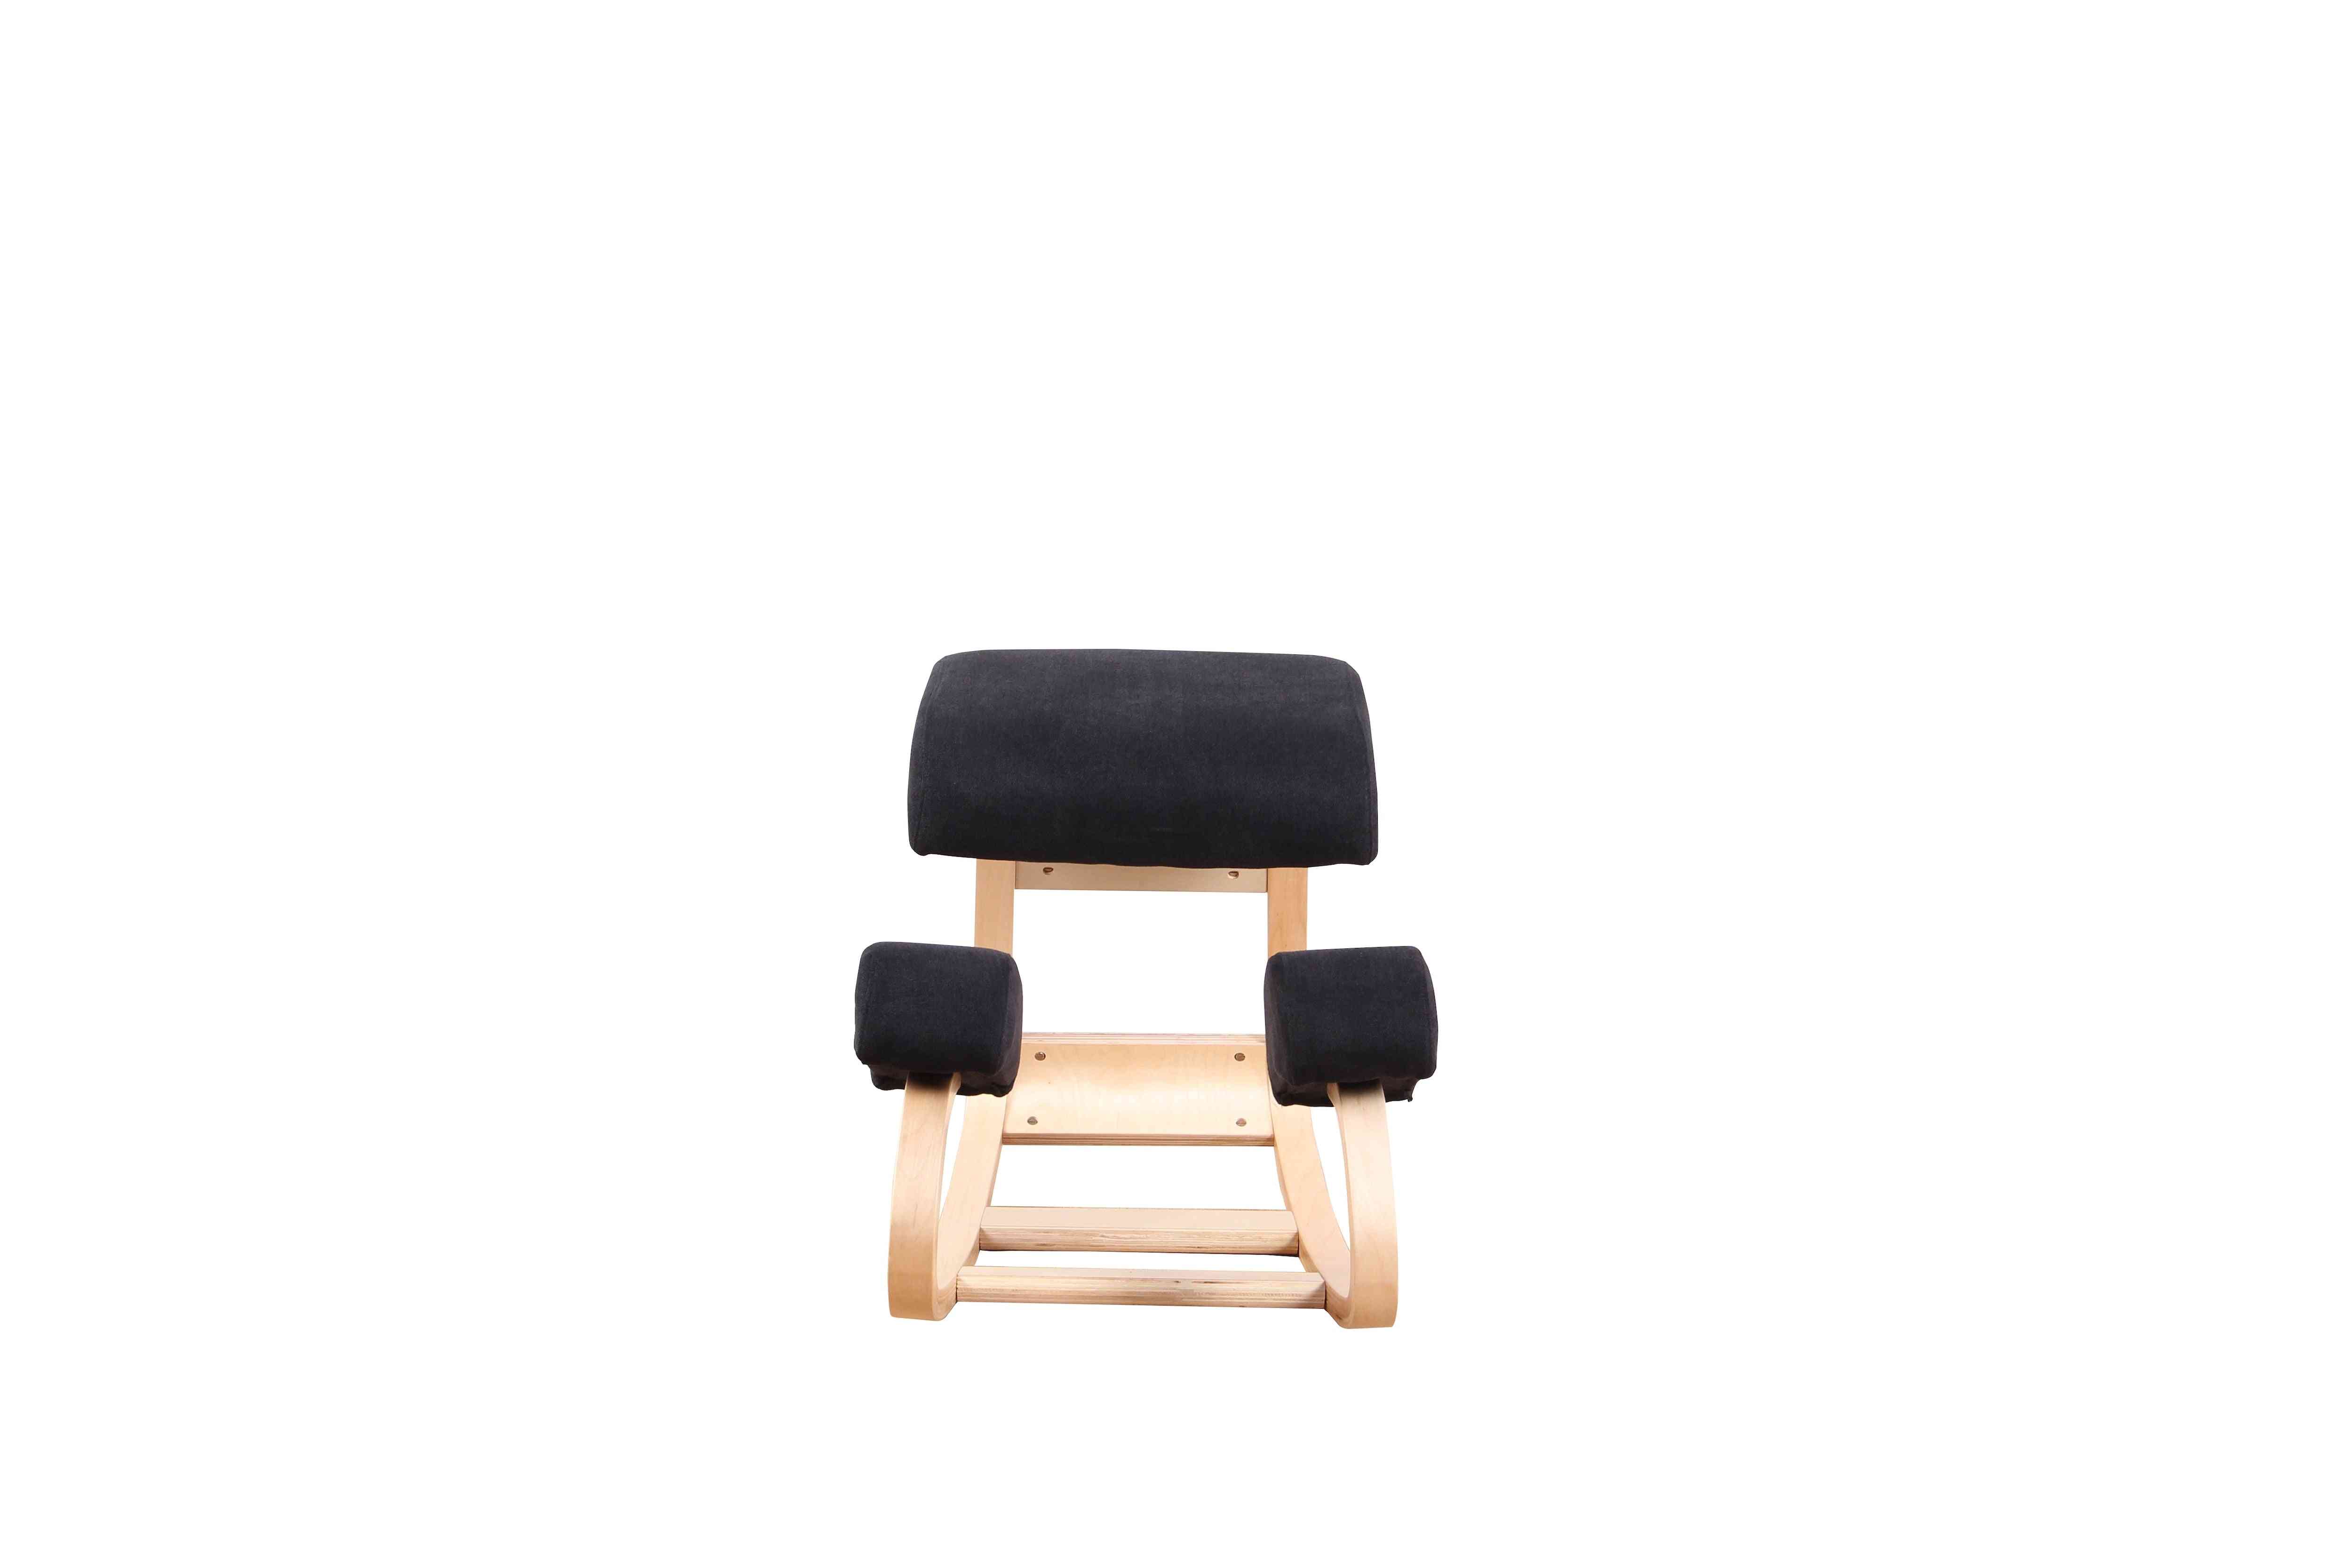 Knee Stool Perfect For Body Shaping And Stress Relief